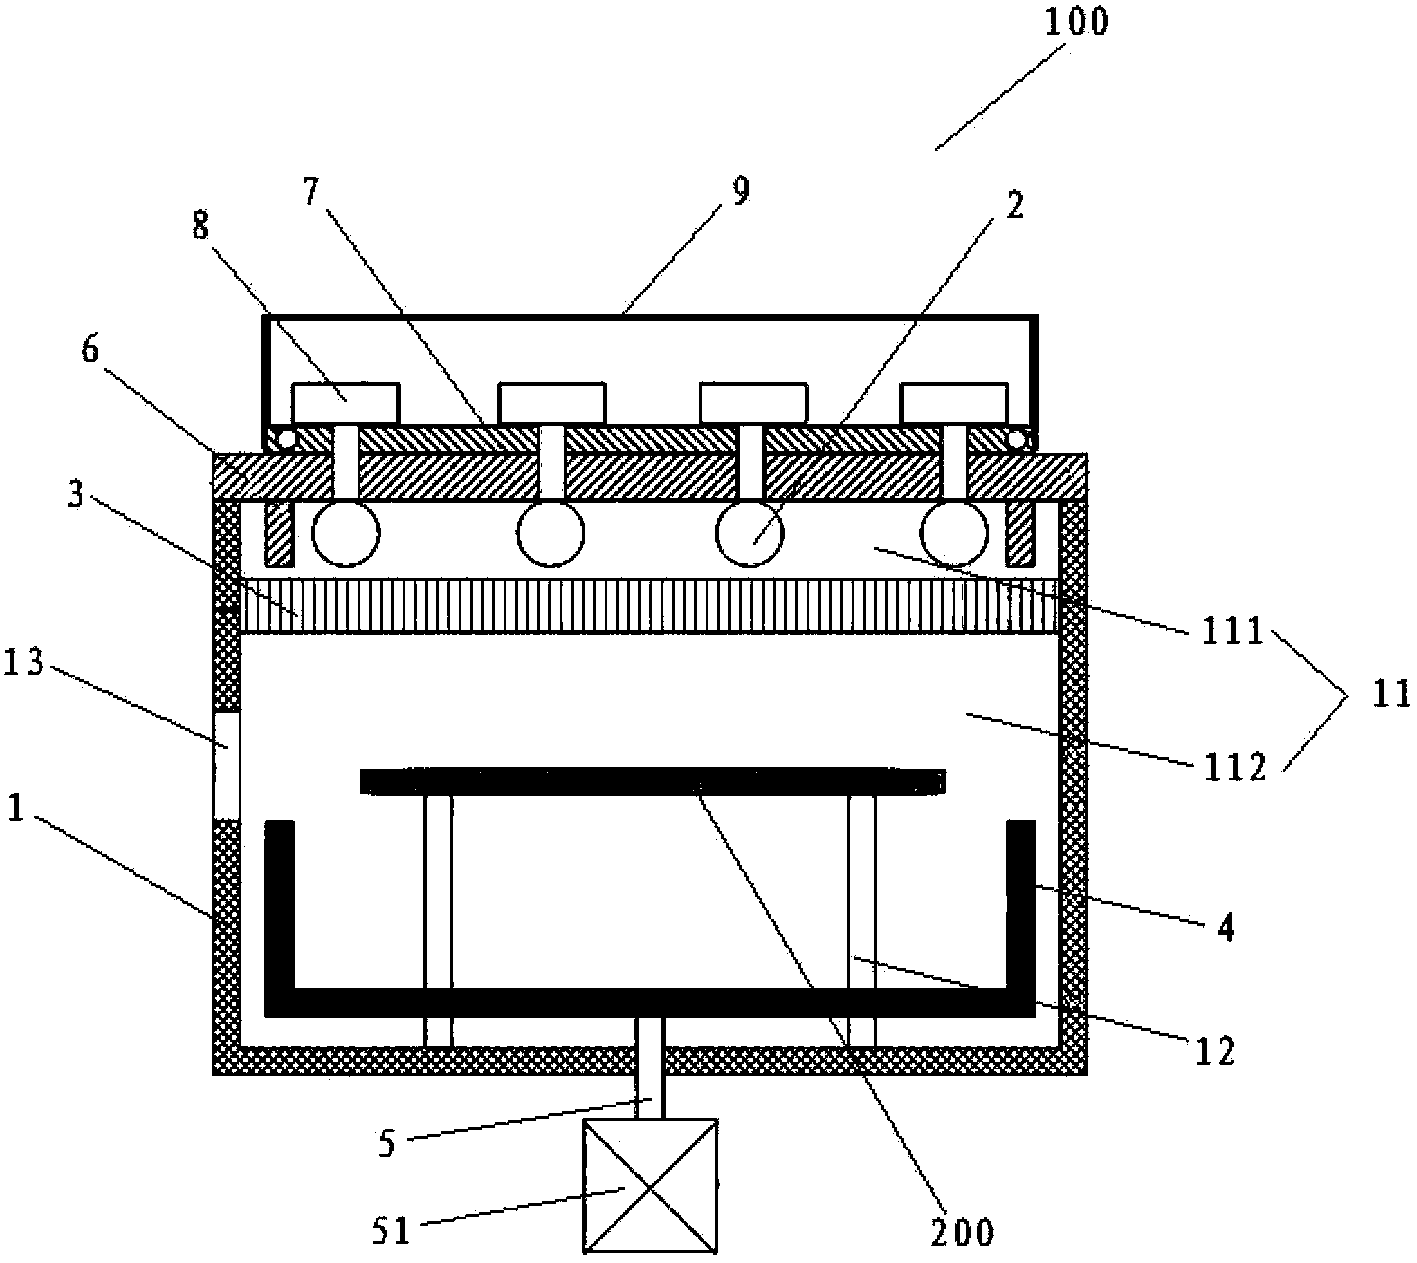 Physical vapor deposition equipment and physical vapor deposition process